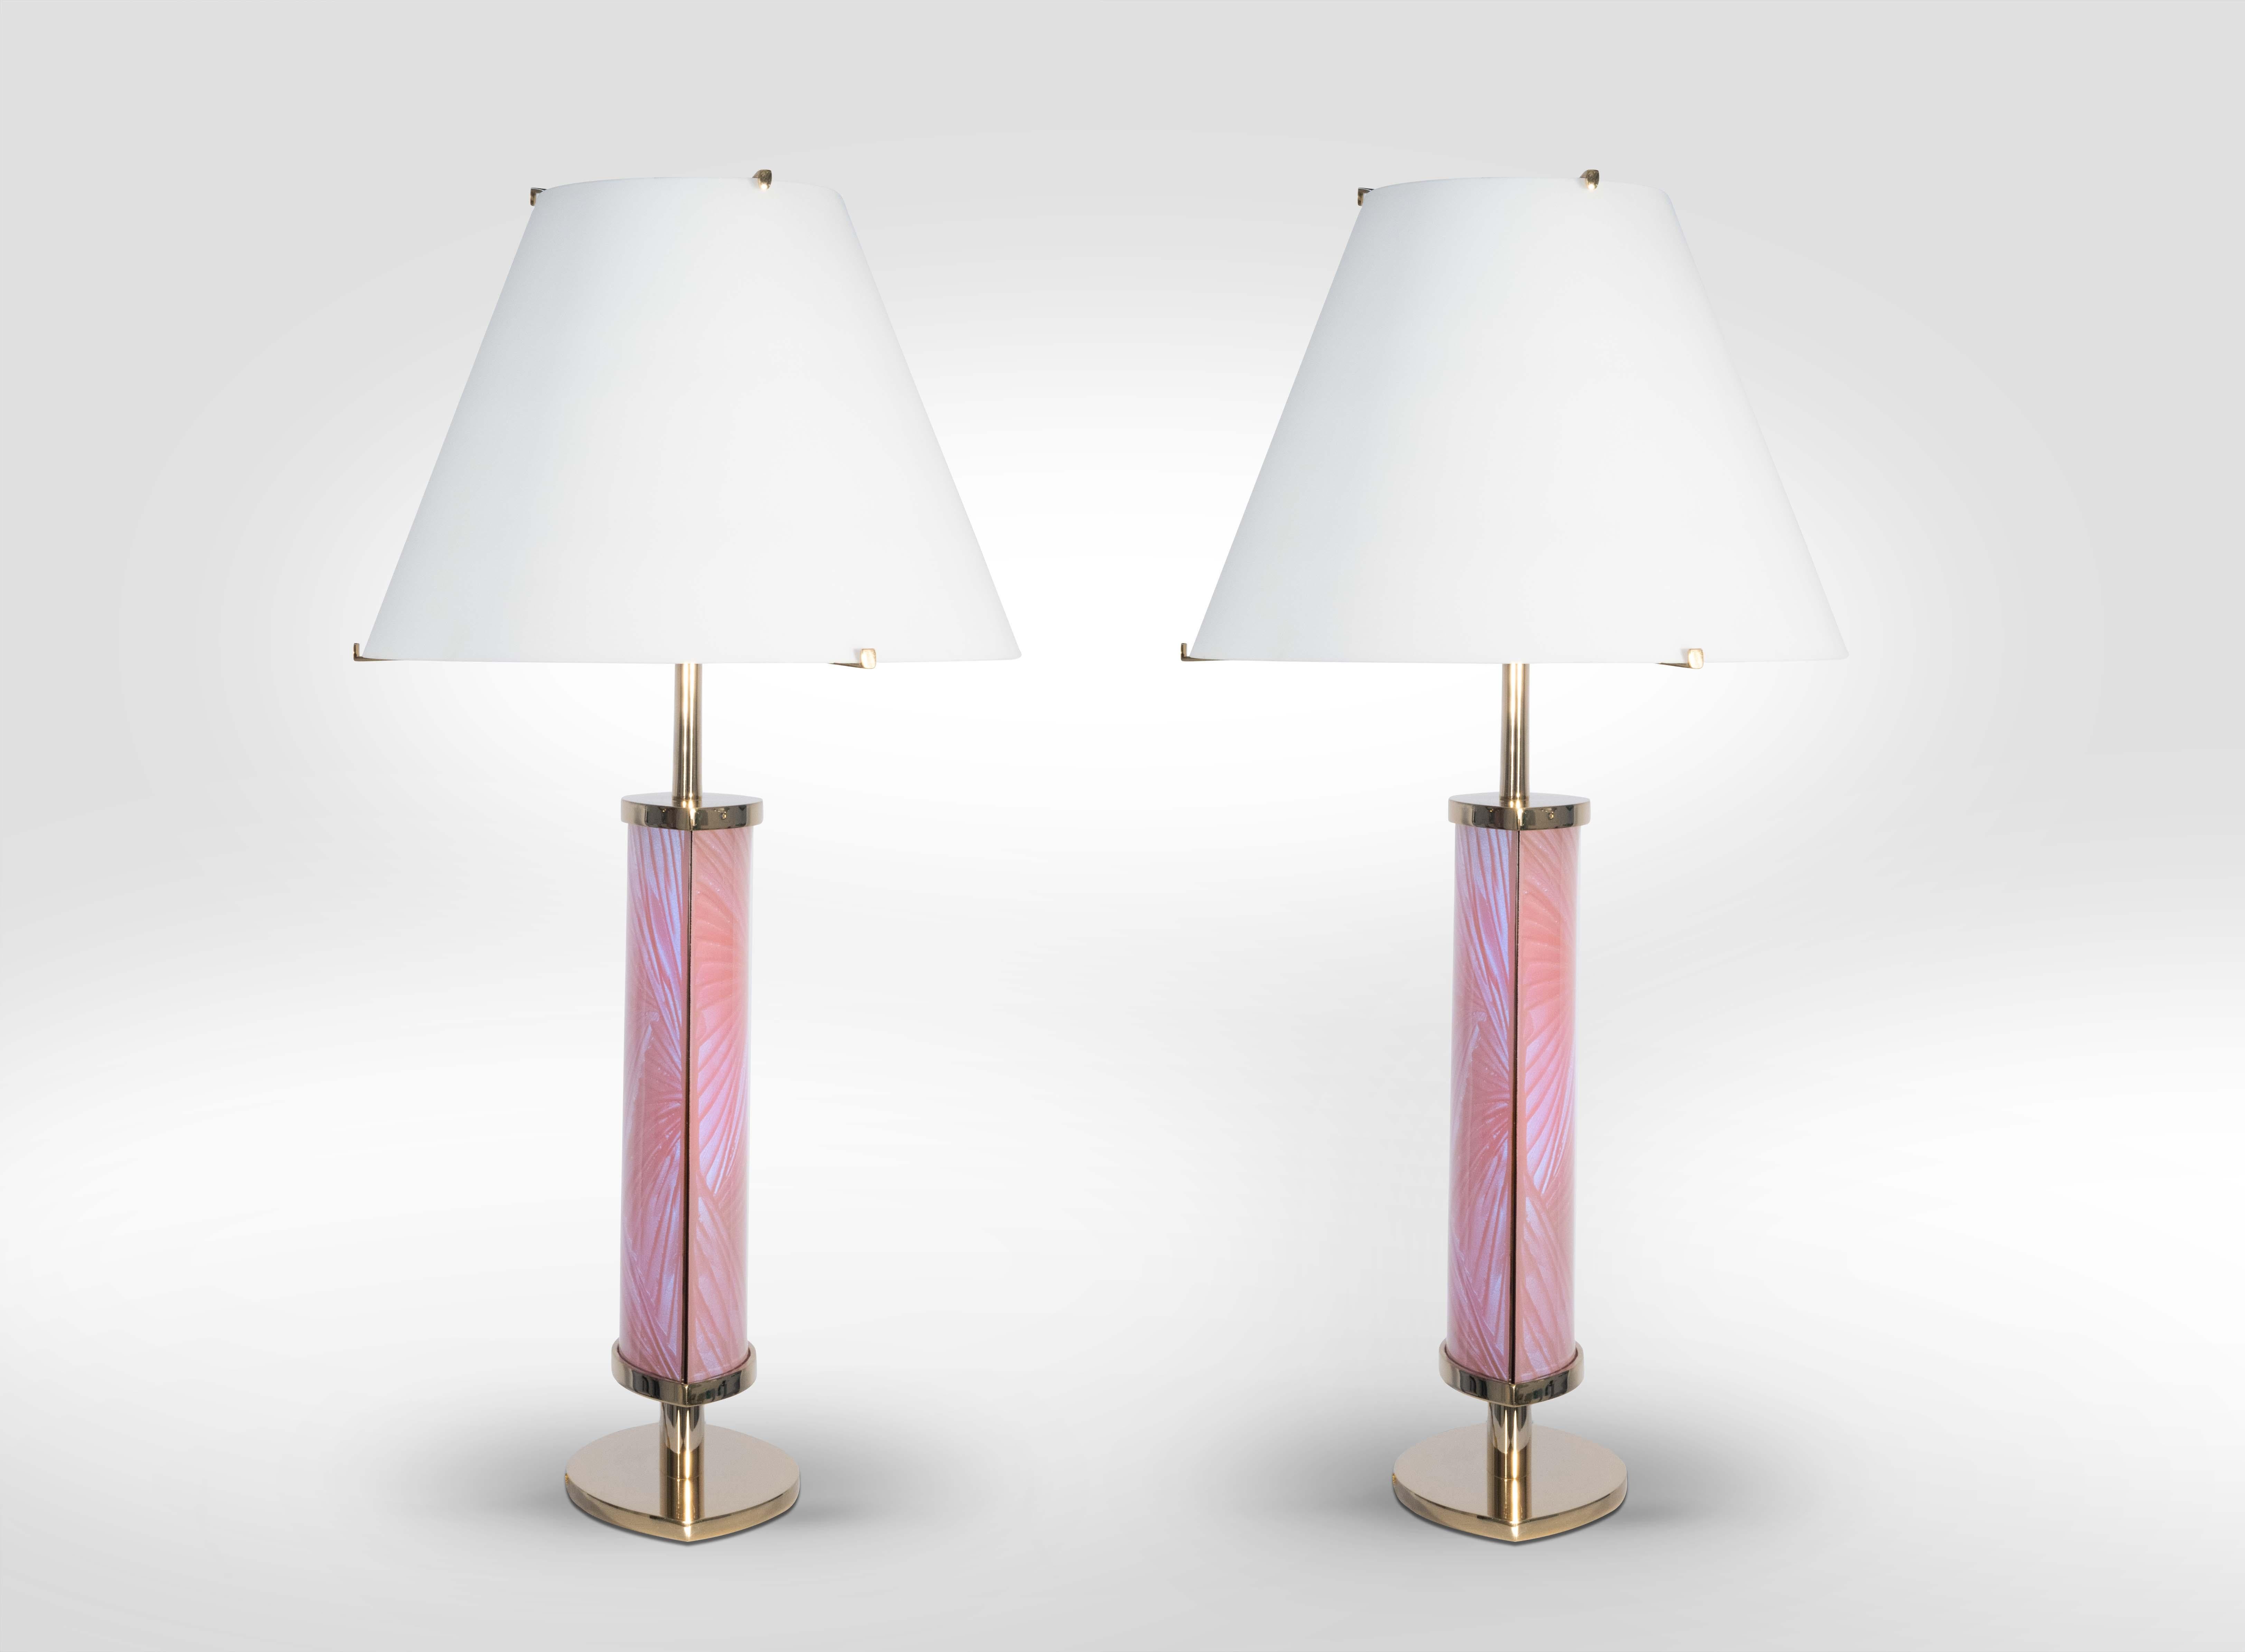 Gilt Contemporary 'Tigra' Table Lamp Iridescent Pink Crystal and Gold by Ghirò Studio For Sale